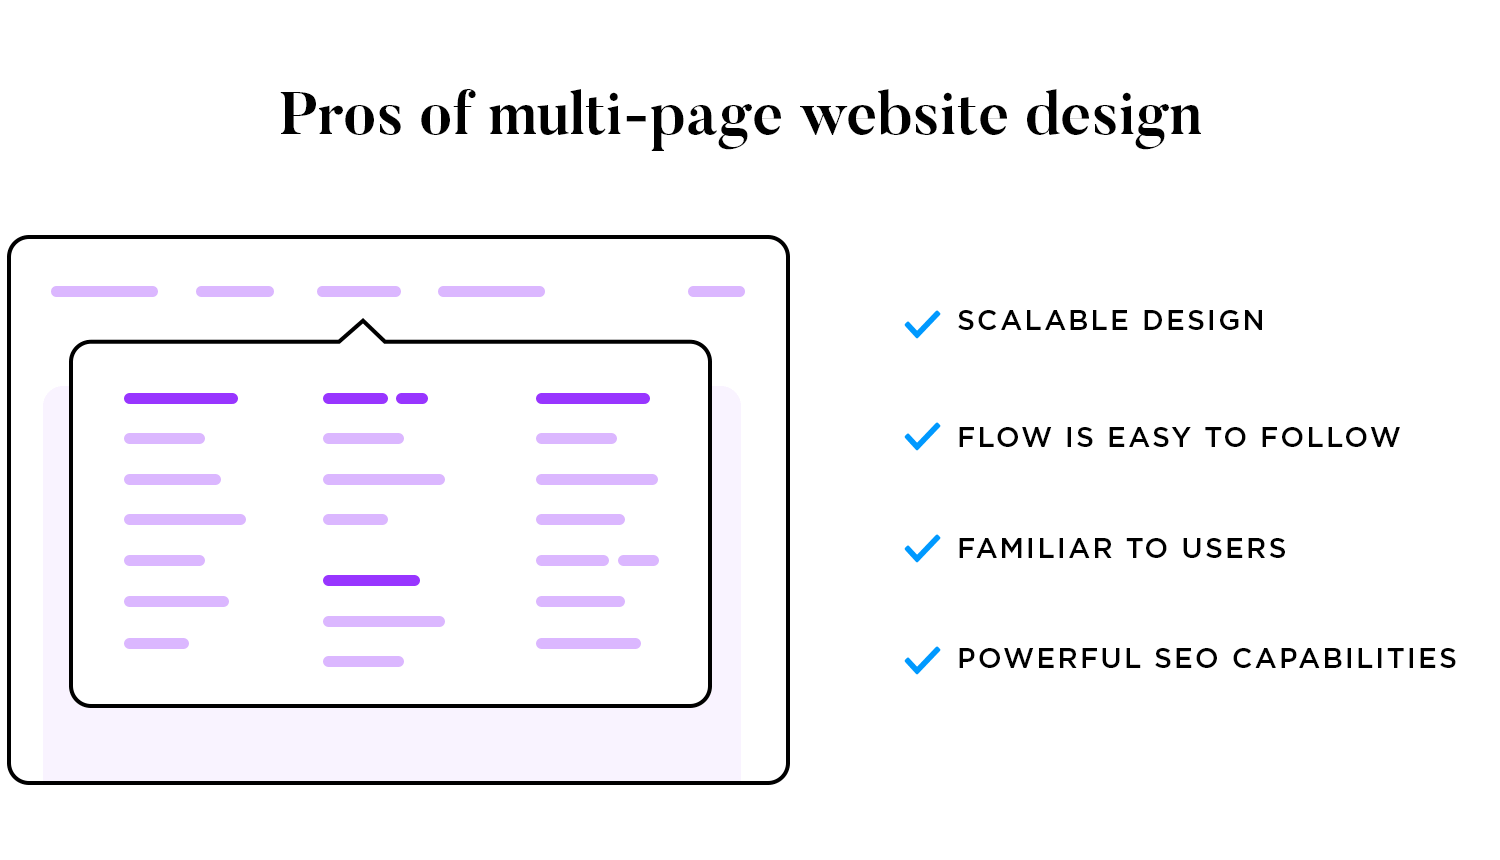 Infographic showing pros of multi-page website design: scalable, easy flow, familiar to users, and powerful SEO.